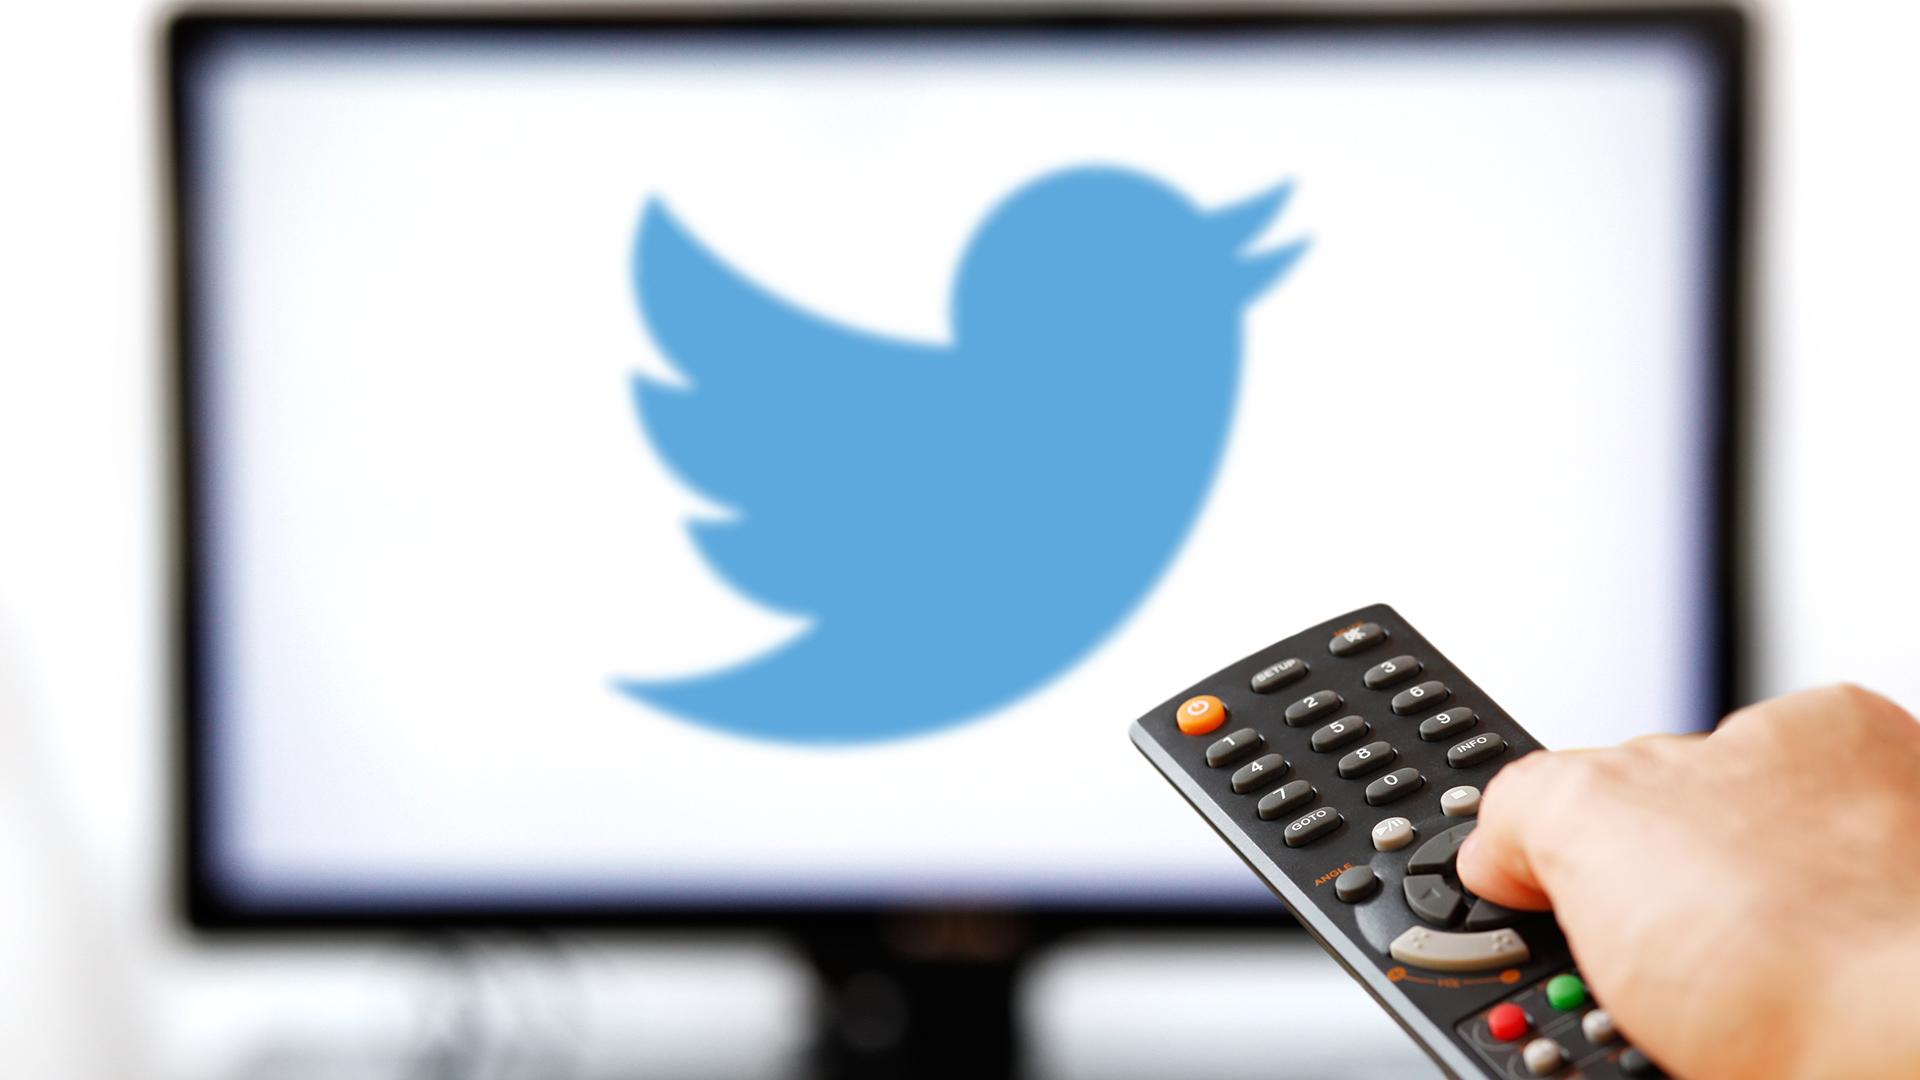 twitter-tv-video-remote-ss-1920